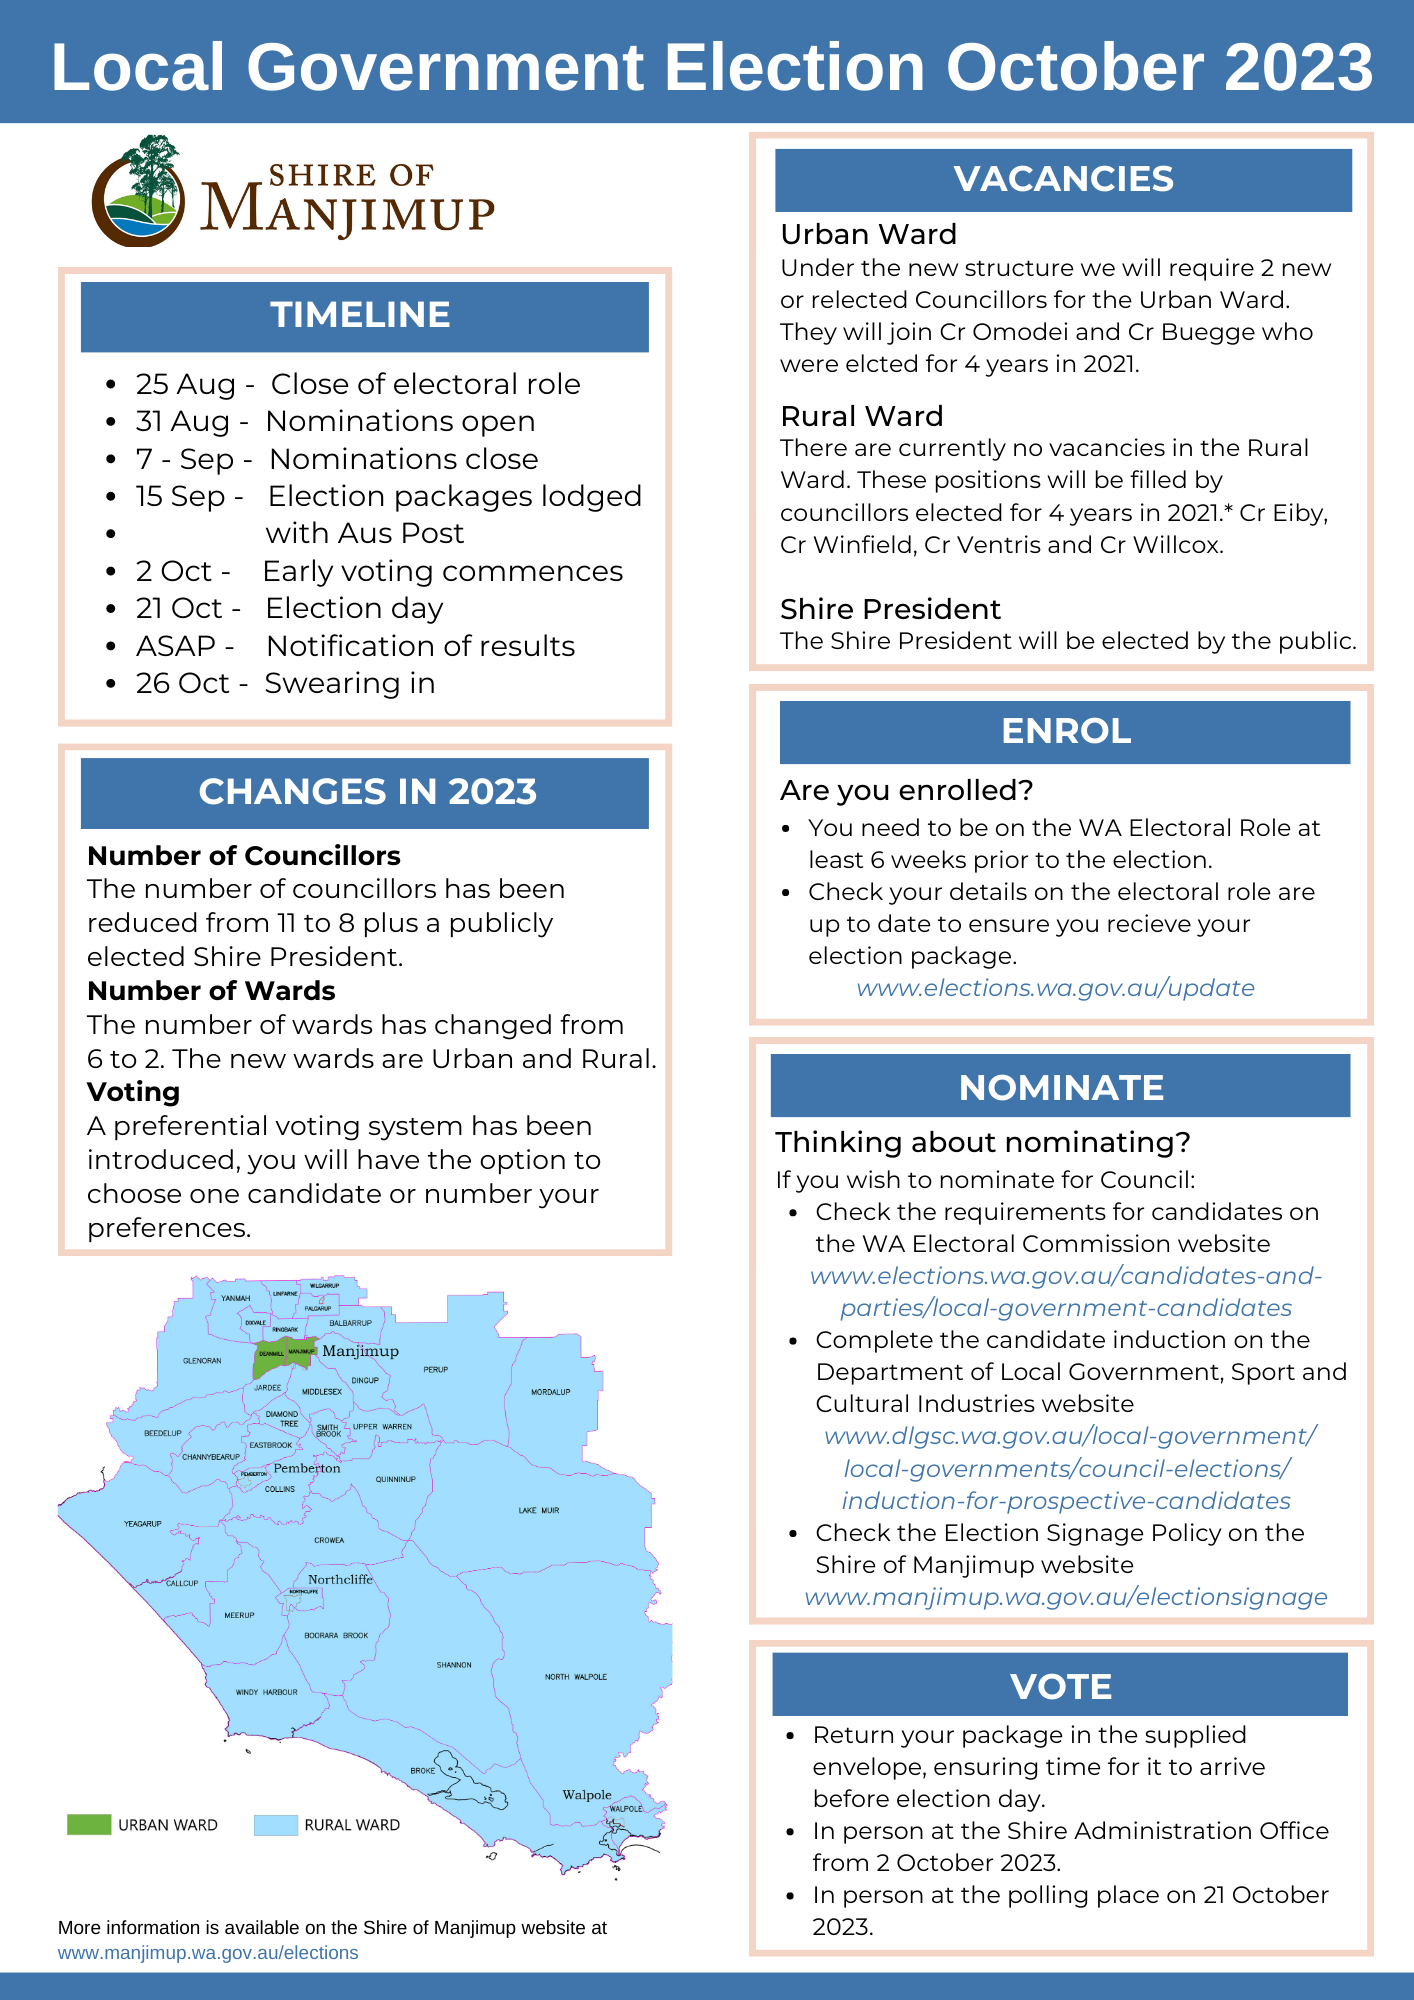 Key information about the 2023 election, PDF available.